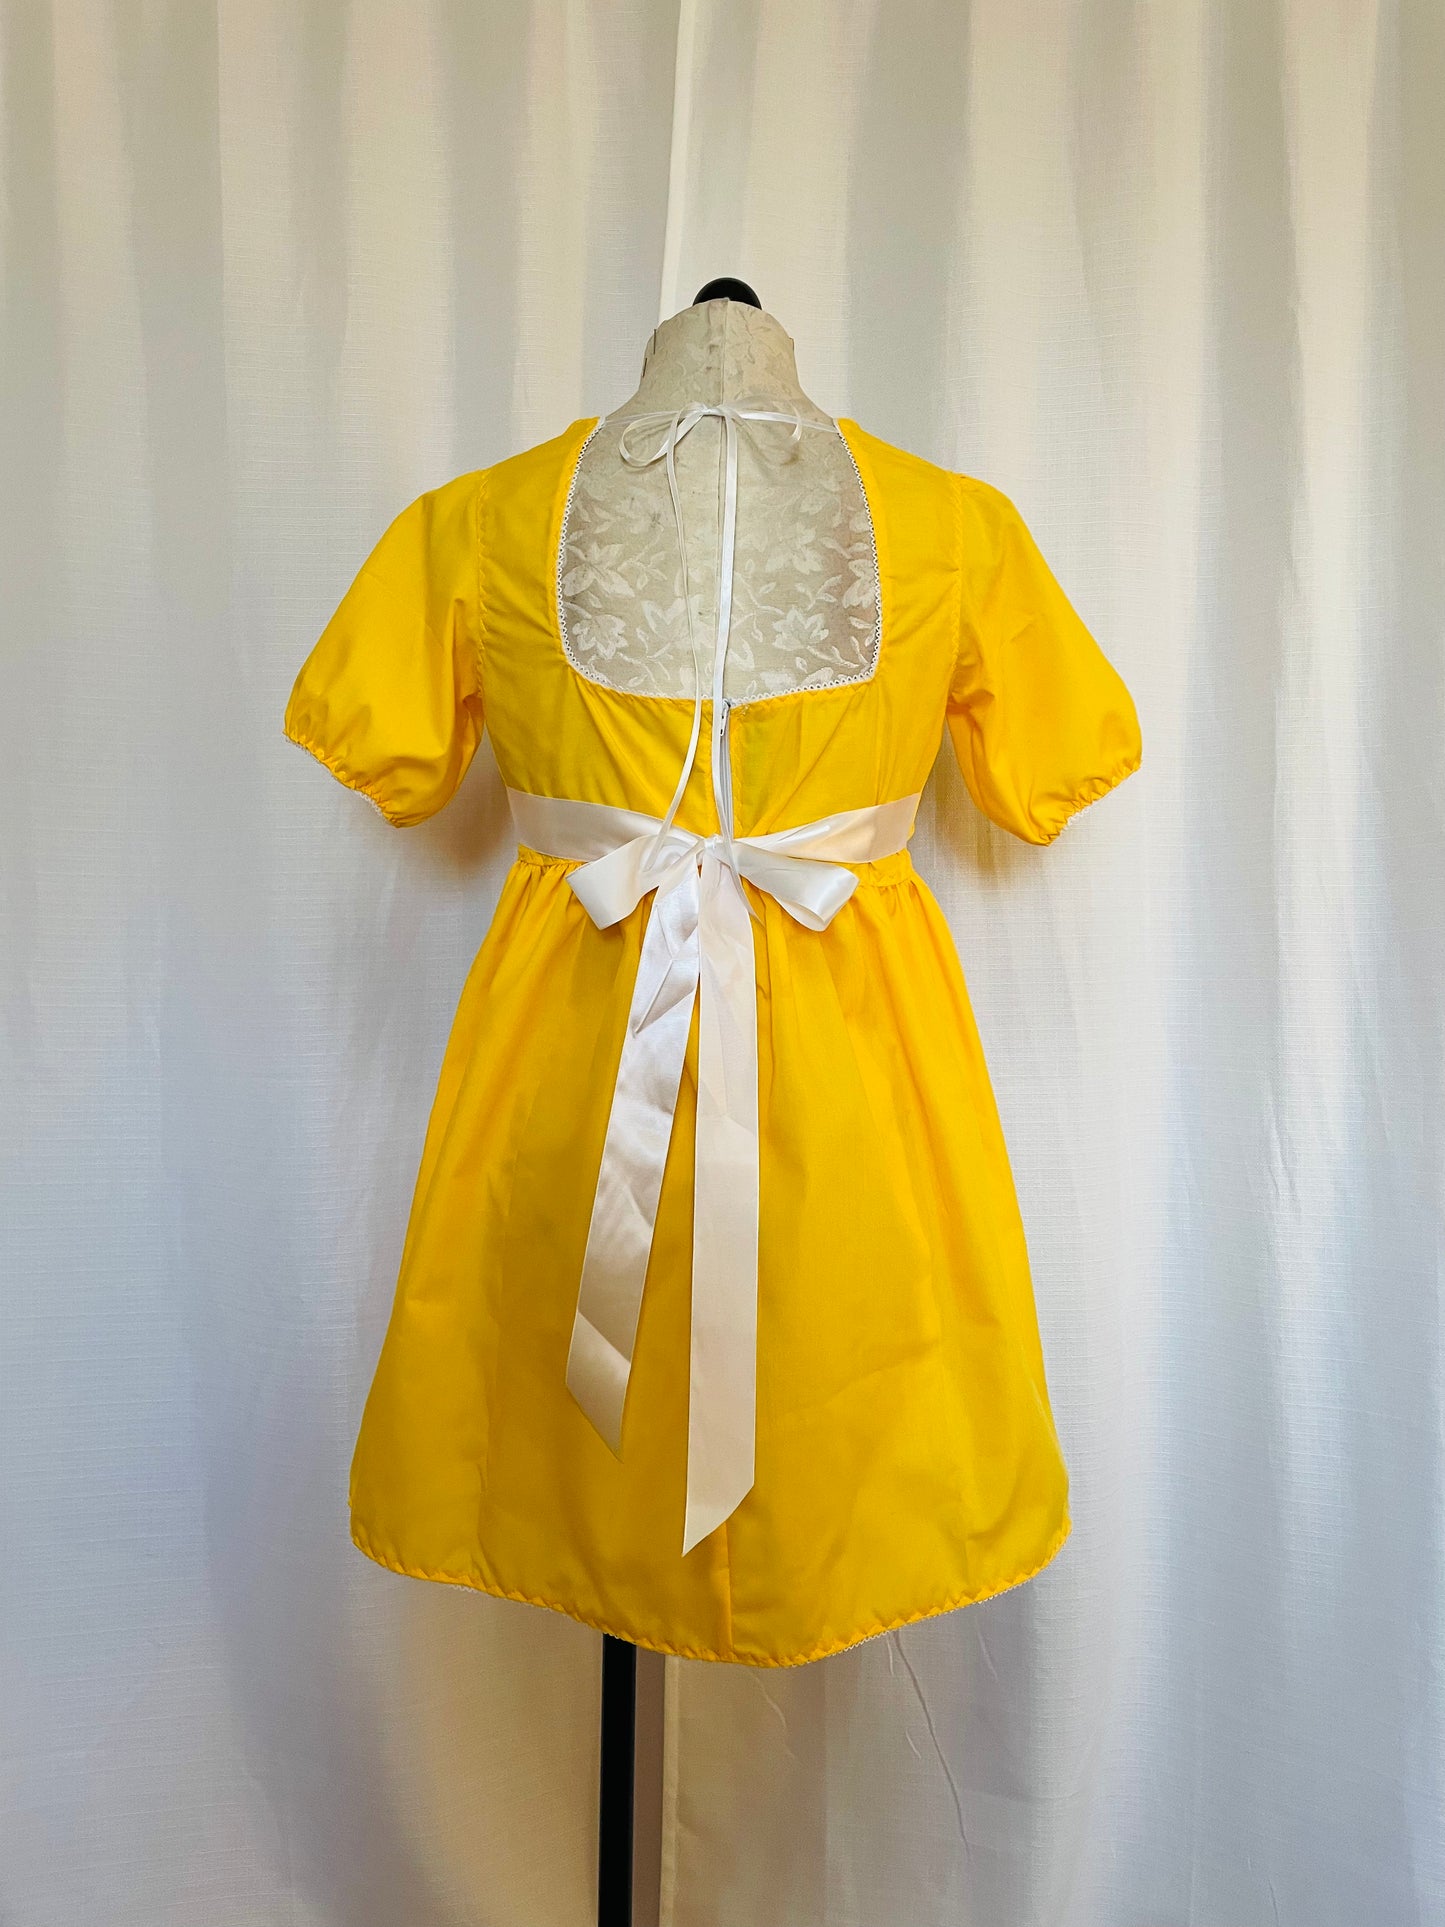 The Betty Babydoll in Yellow